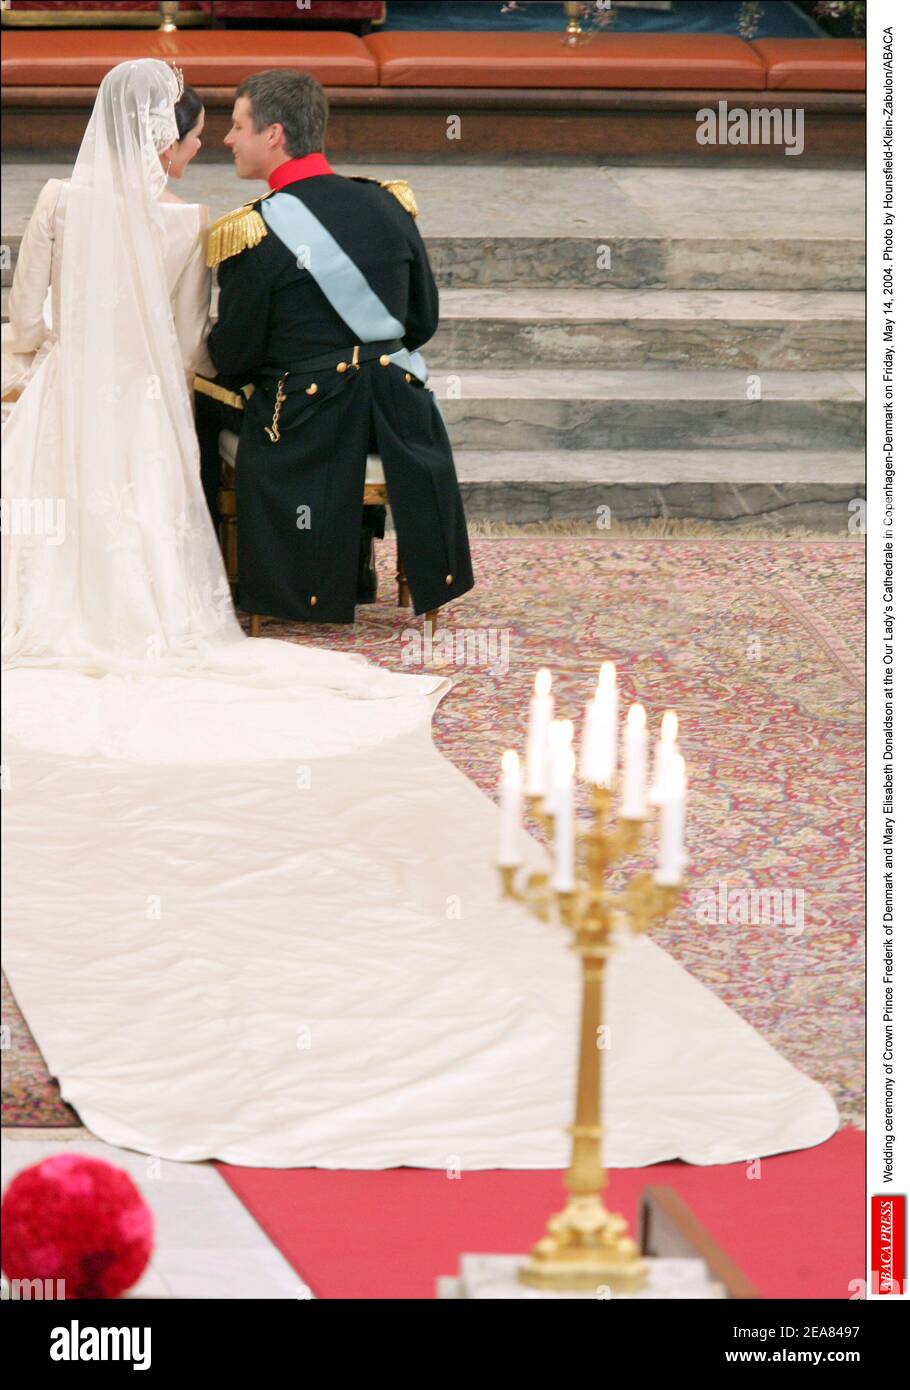 Wedding ceremony of Crown Prince Frederik of Denmark and Mary Elisabeth Donaldson at the Our Lady's Cathedrale in Copenhagen-Denmark on Friday, May 14, 2004. Photo by Hounsfield-Klein-Zabulon/ABACA Stock Photo